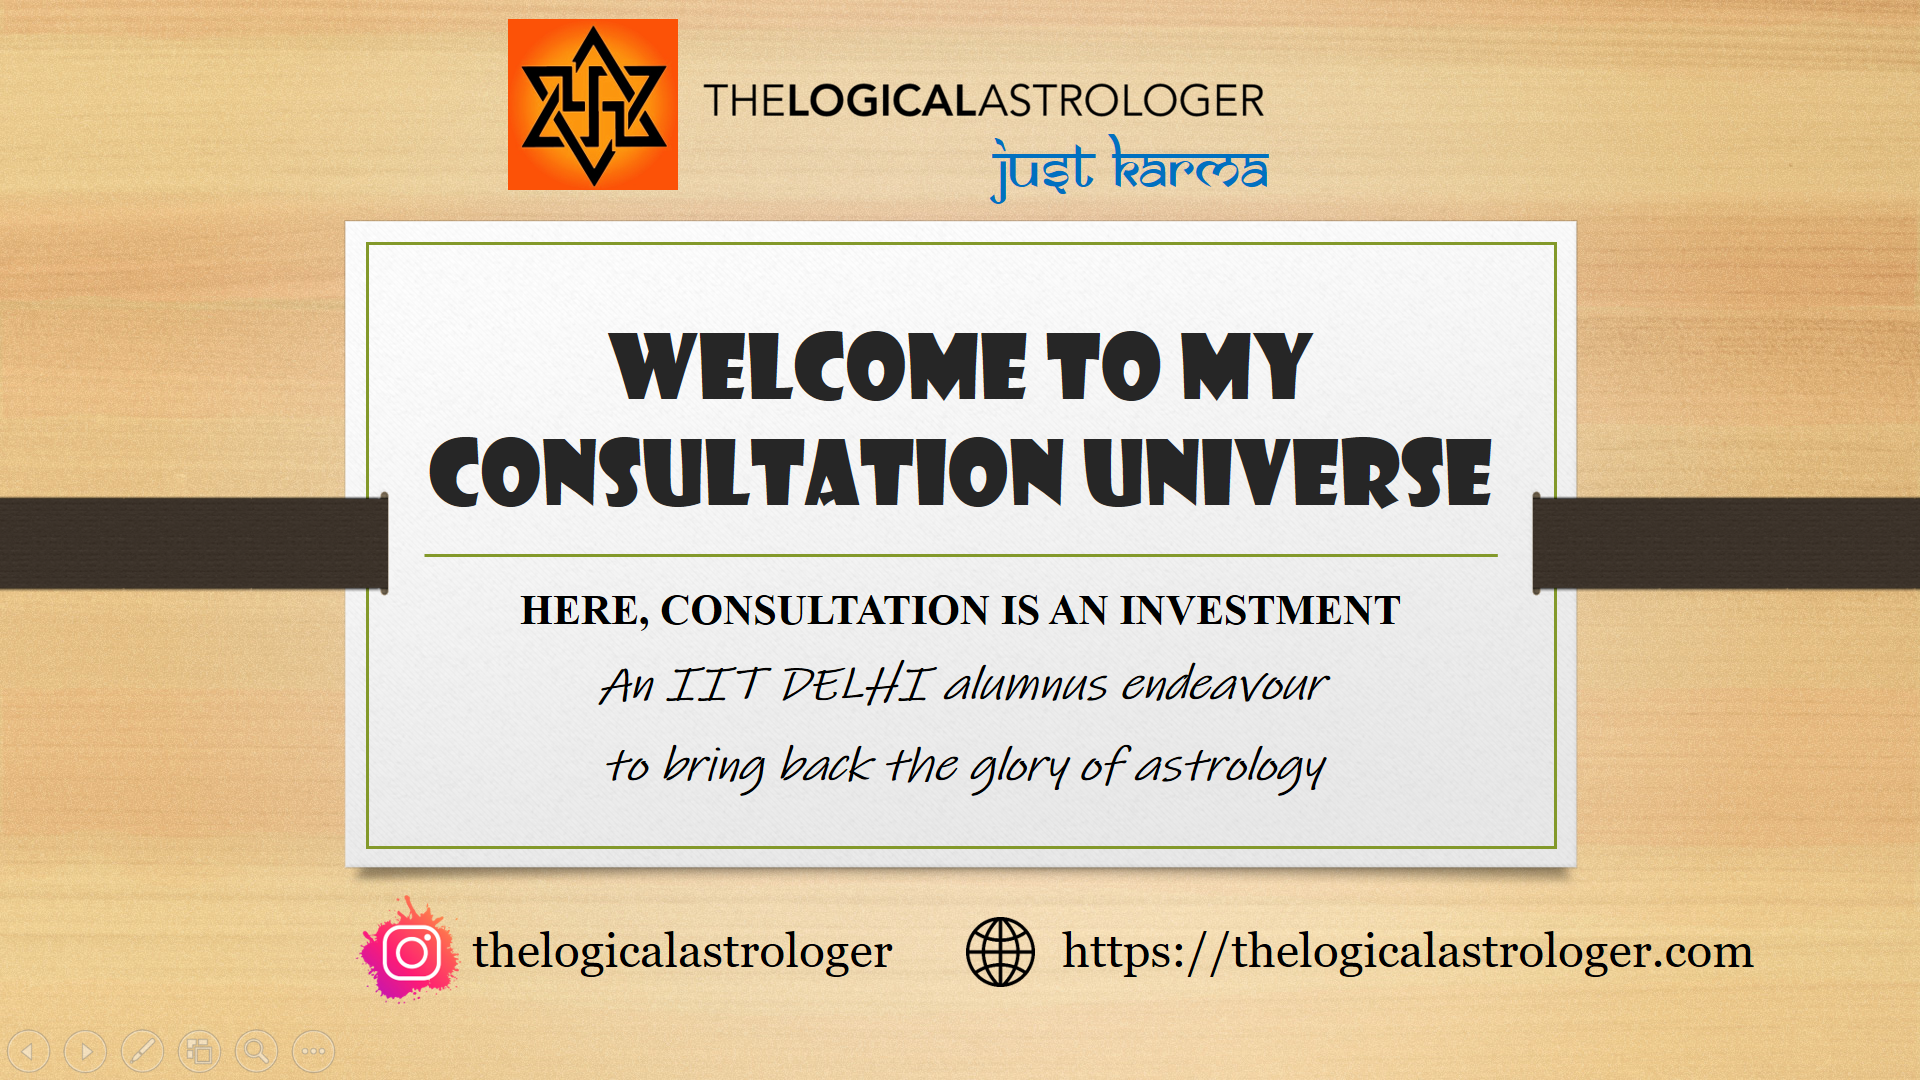 THE LOGICAL ASTROLOGER CONSULTATION 
(NRI/foreigners)